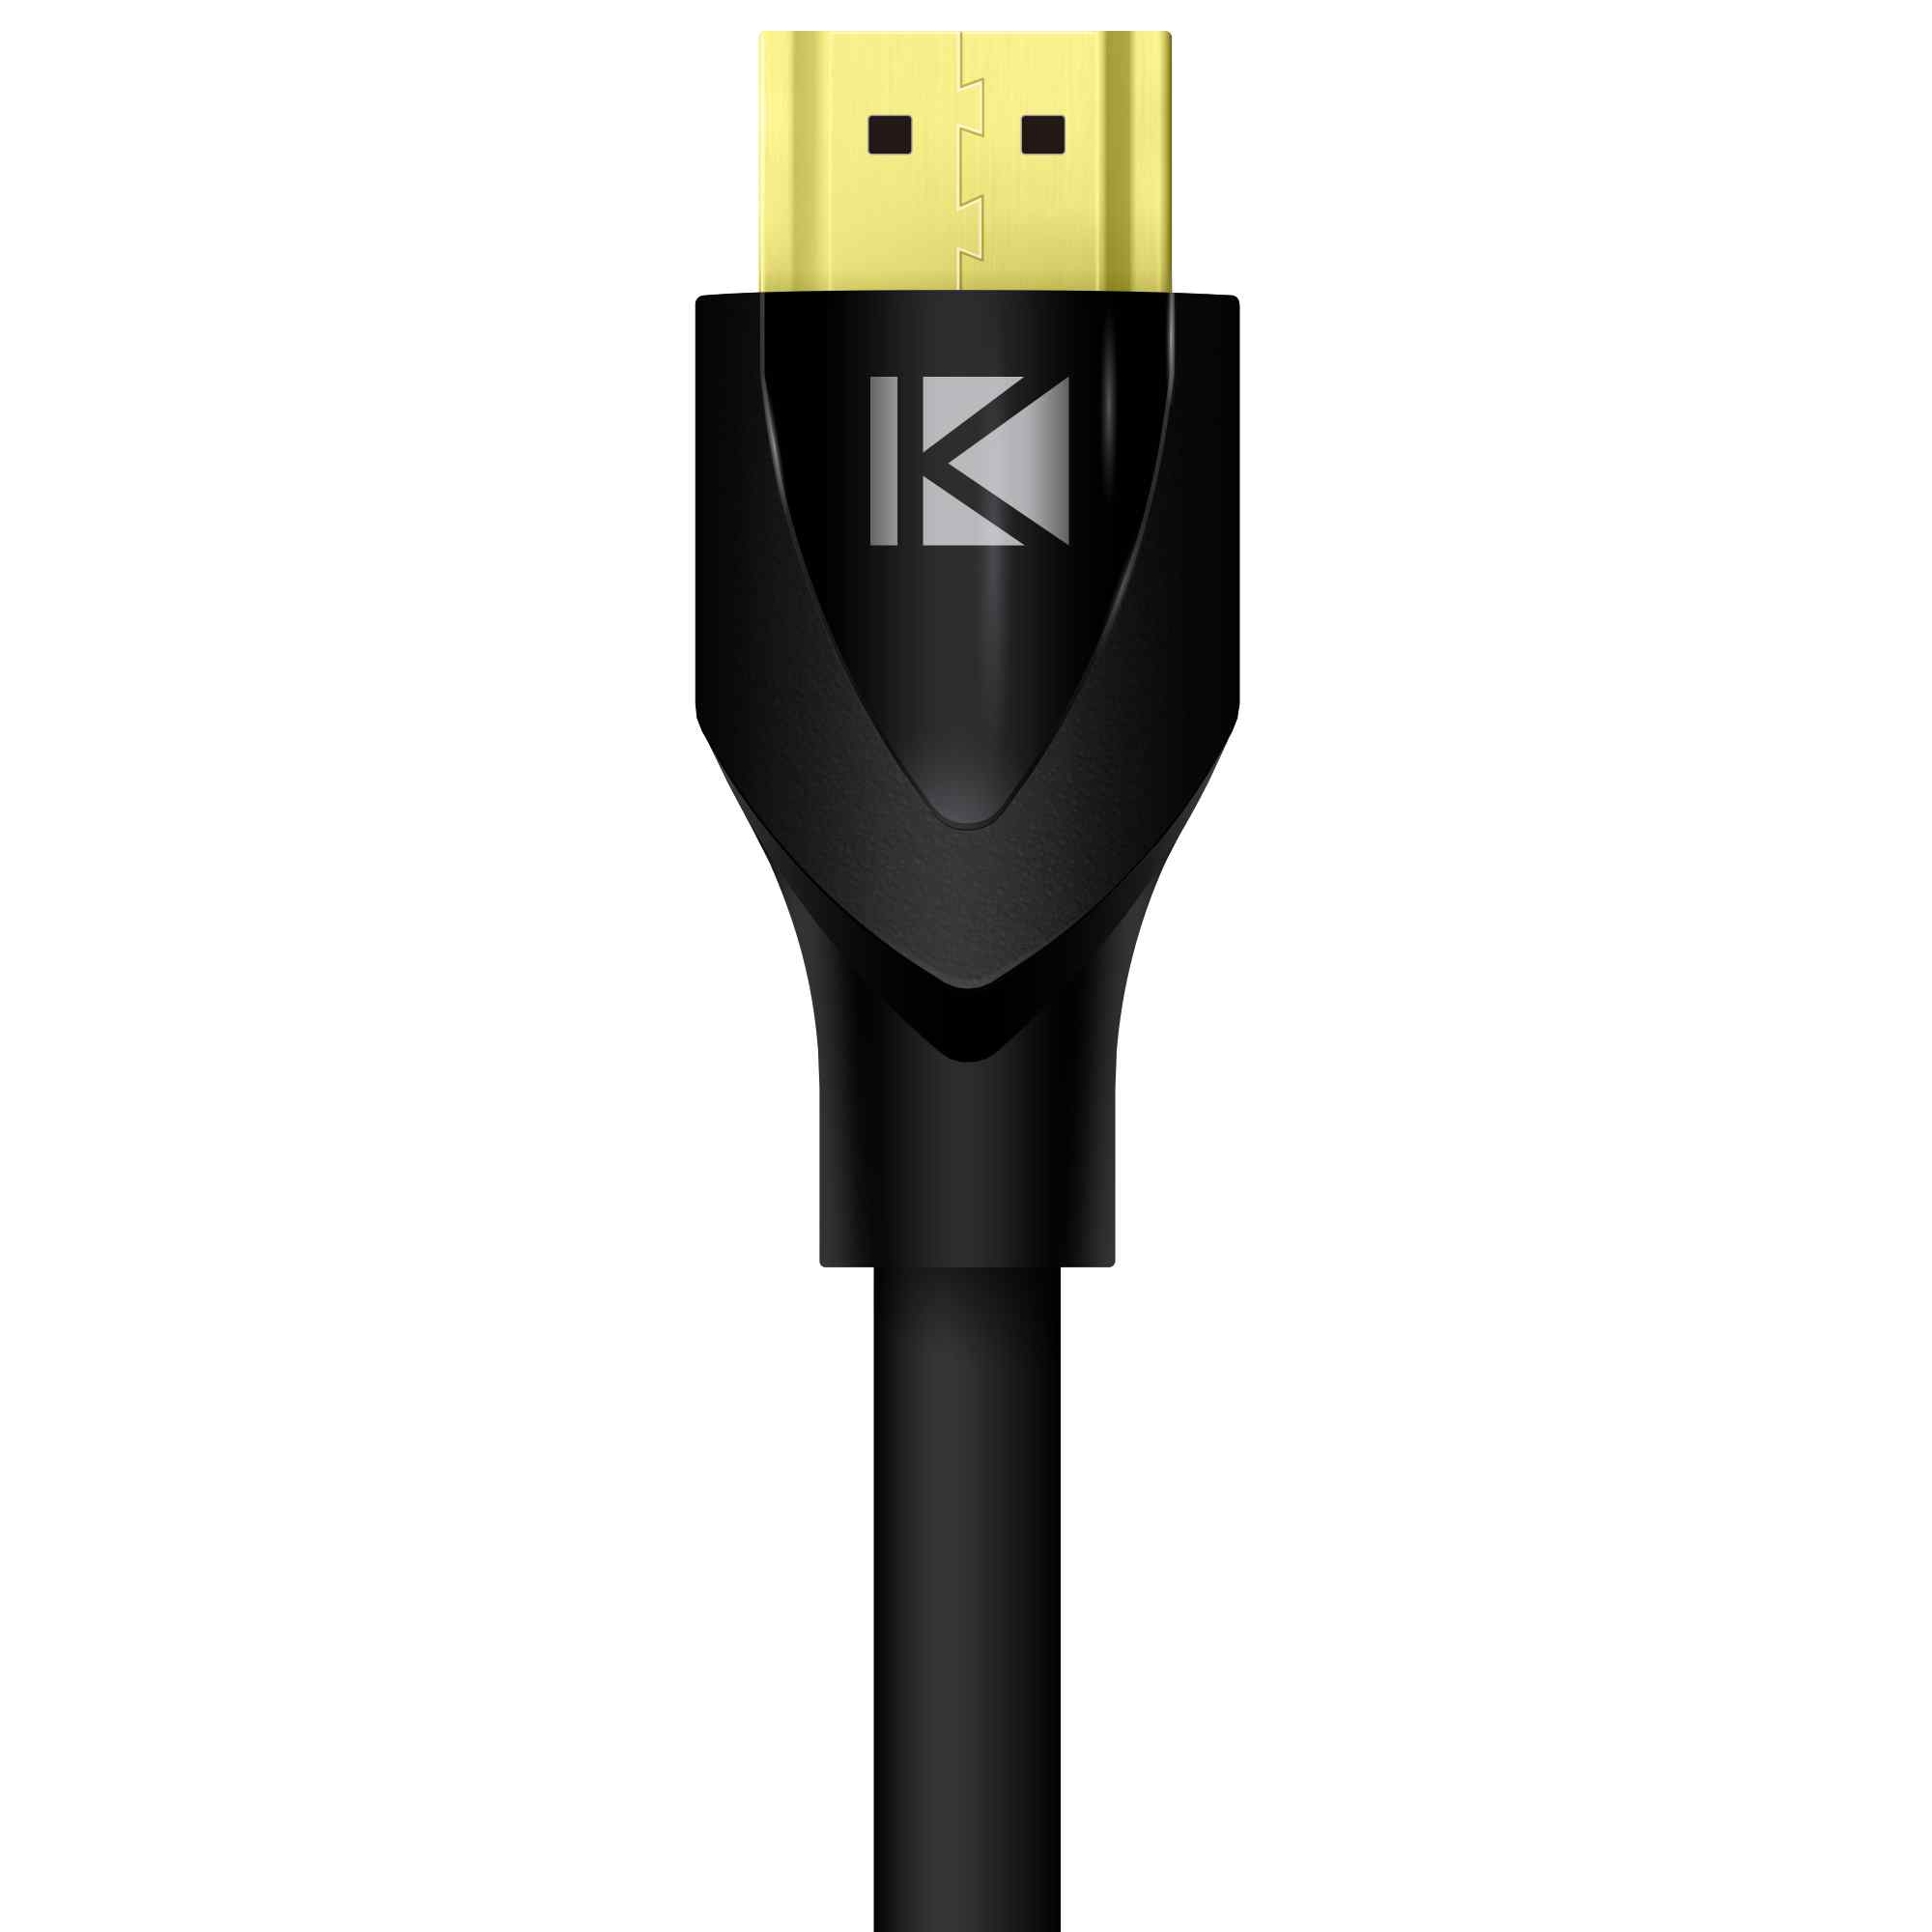 Key Digital hdmi high speed cable Rear View